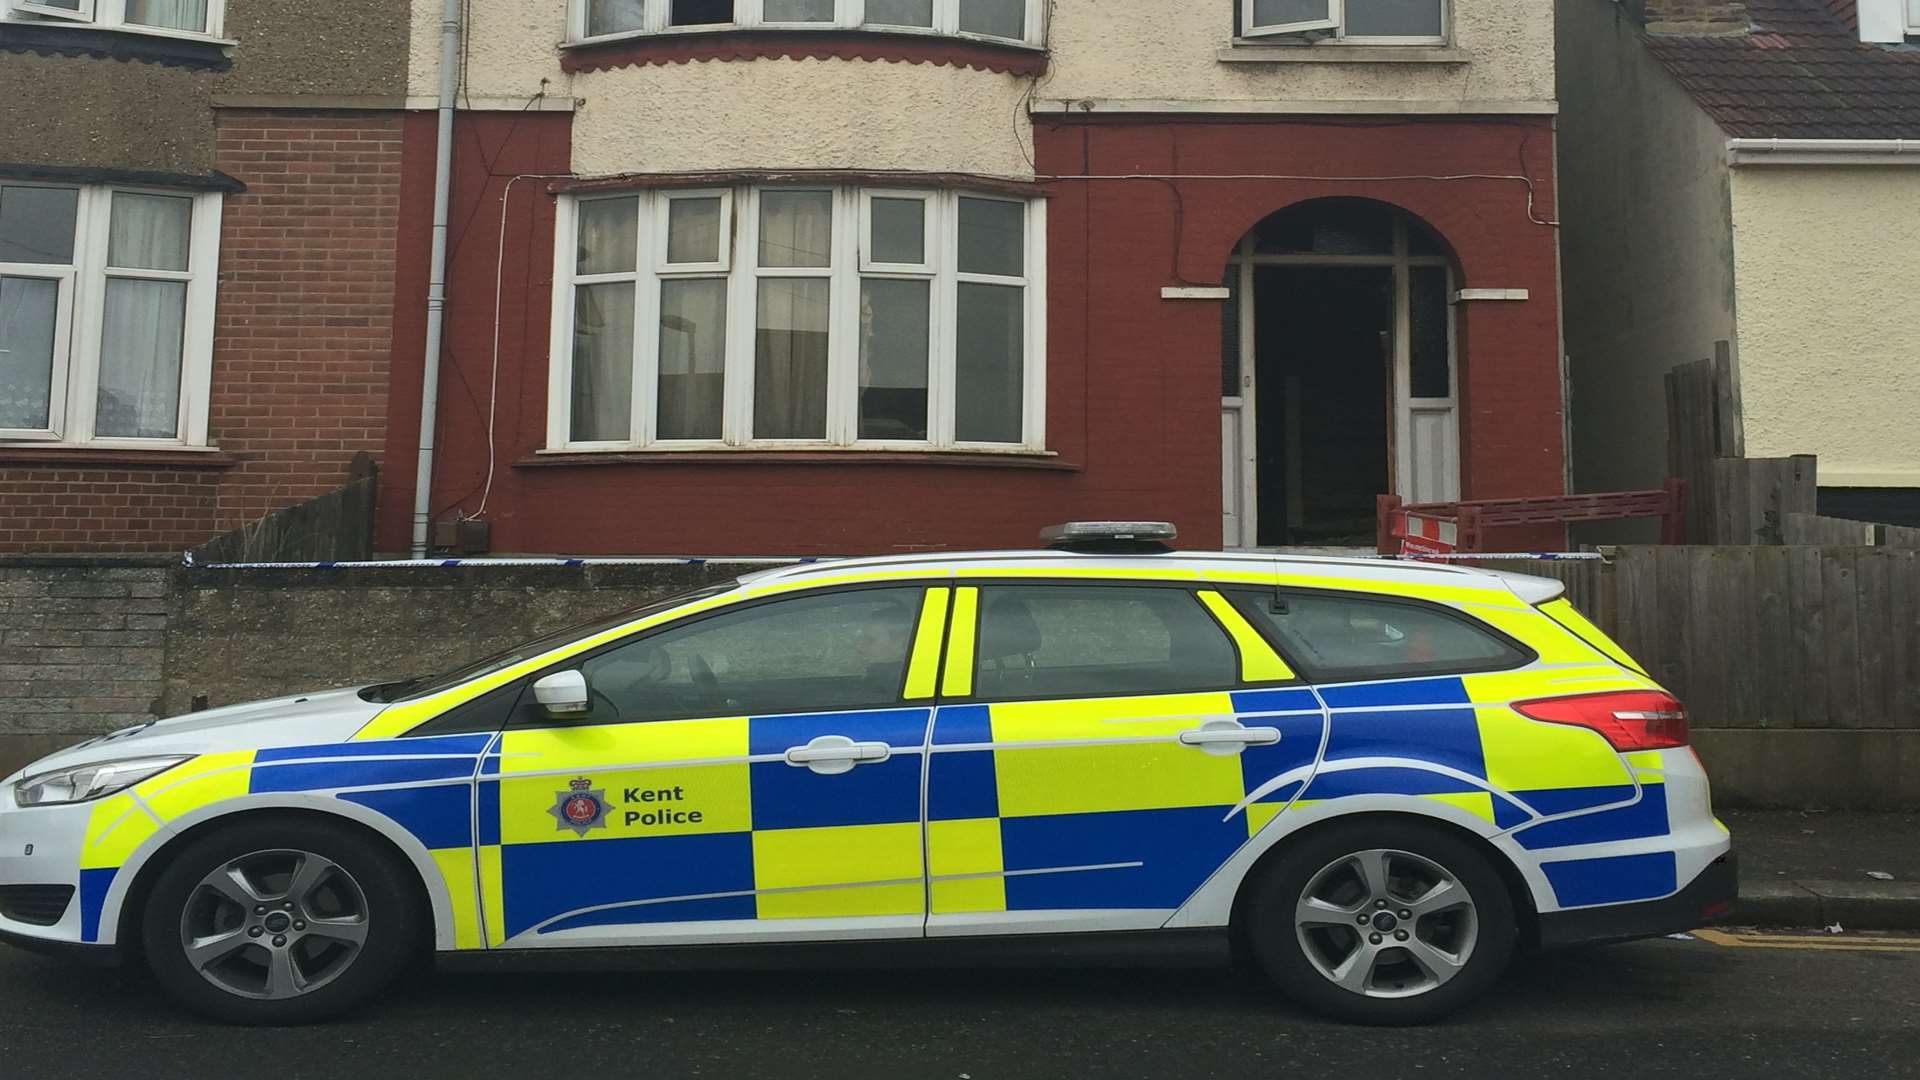 A police car parked outside the burnt out house in Clarence Road, Chatham